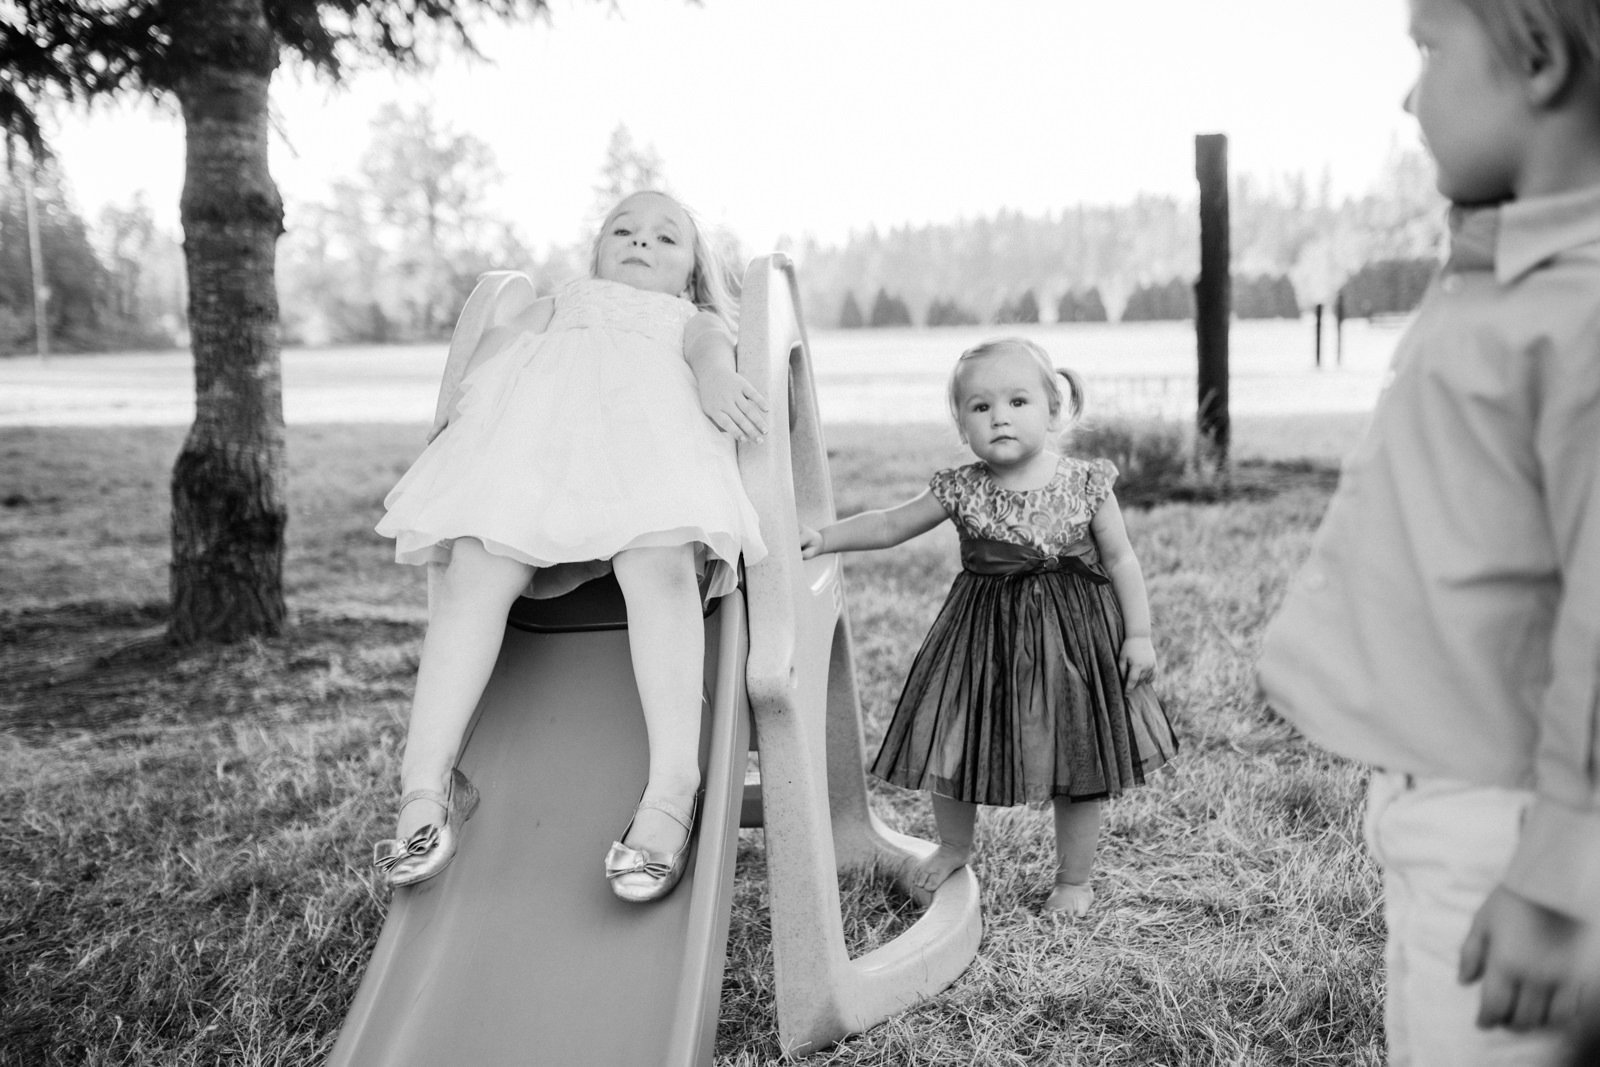  Kids sliding down kiddie slide while others watch in black and white 